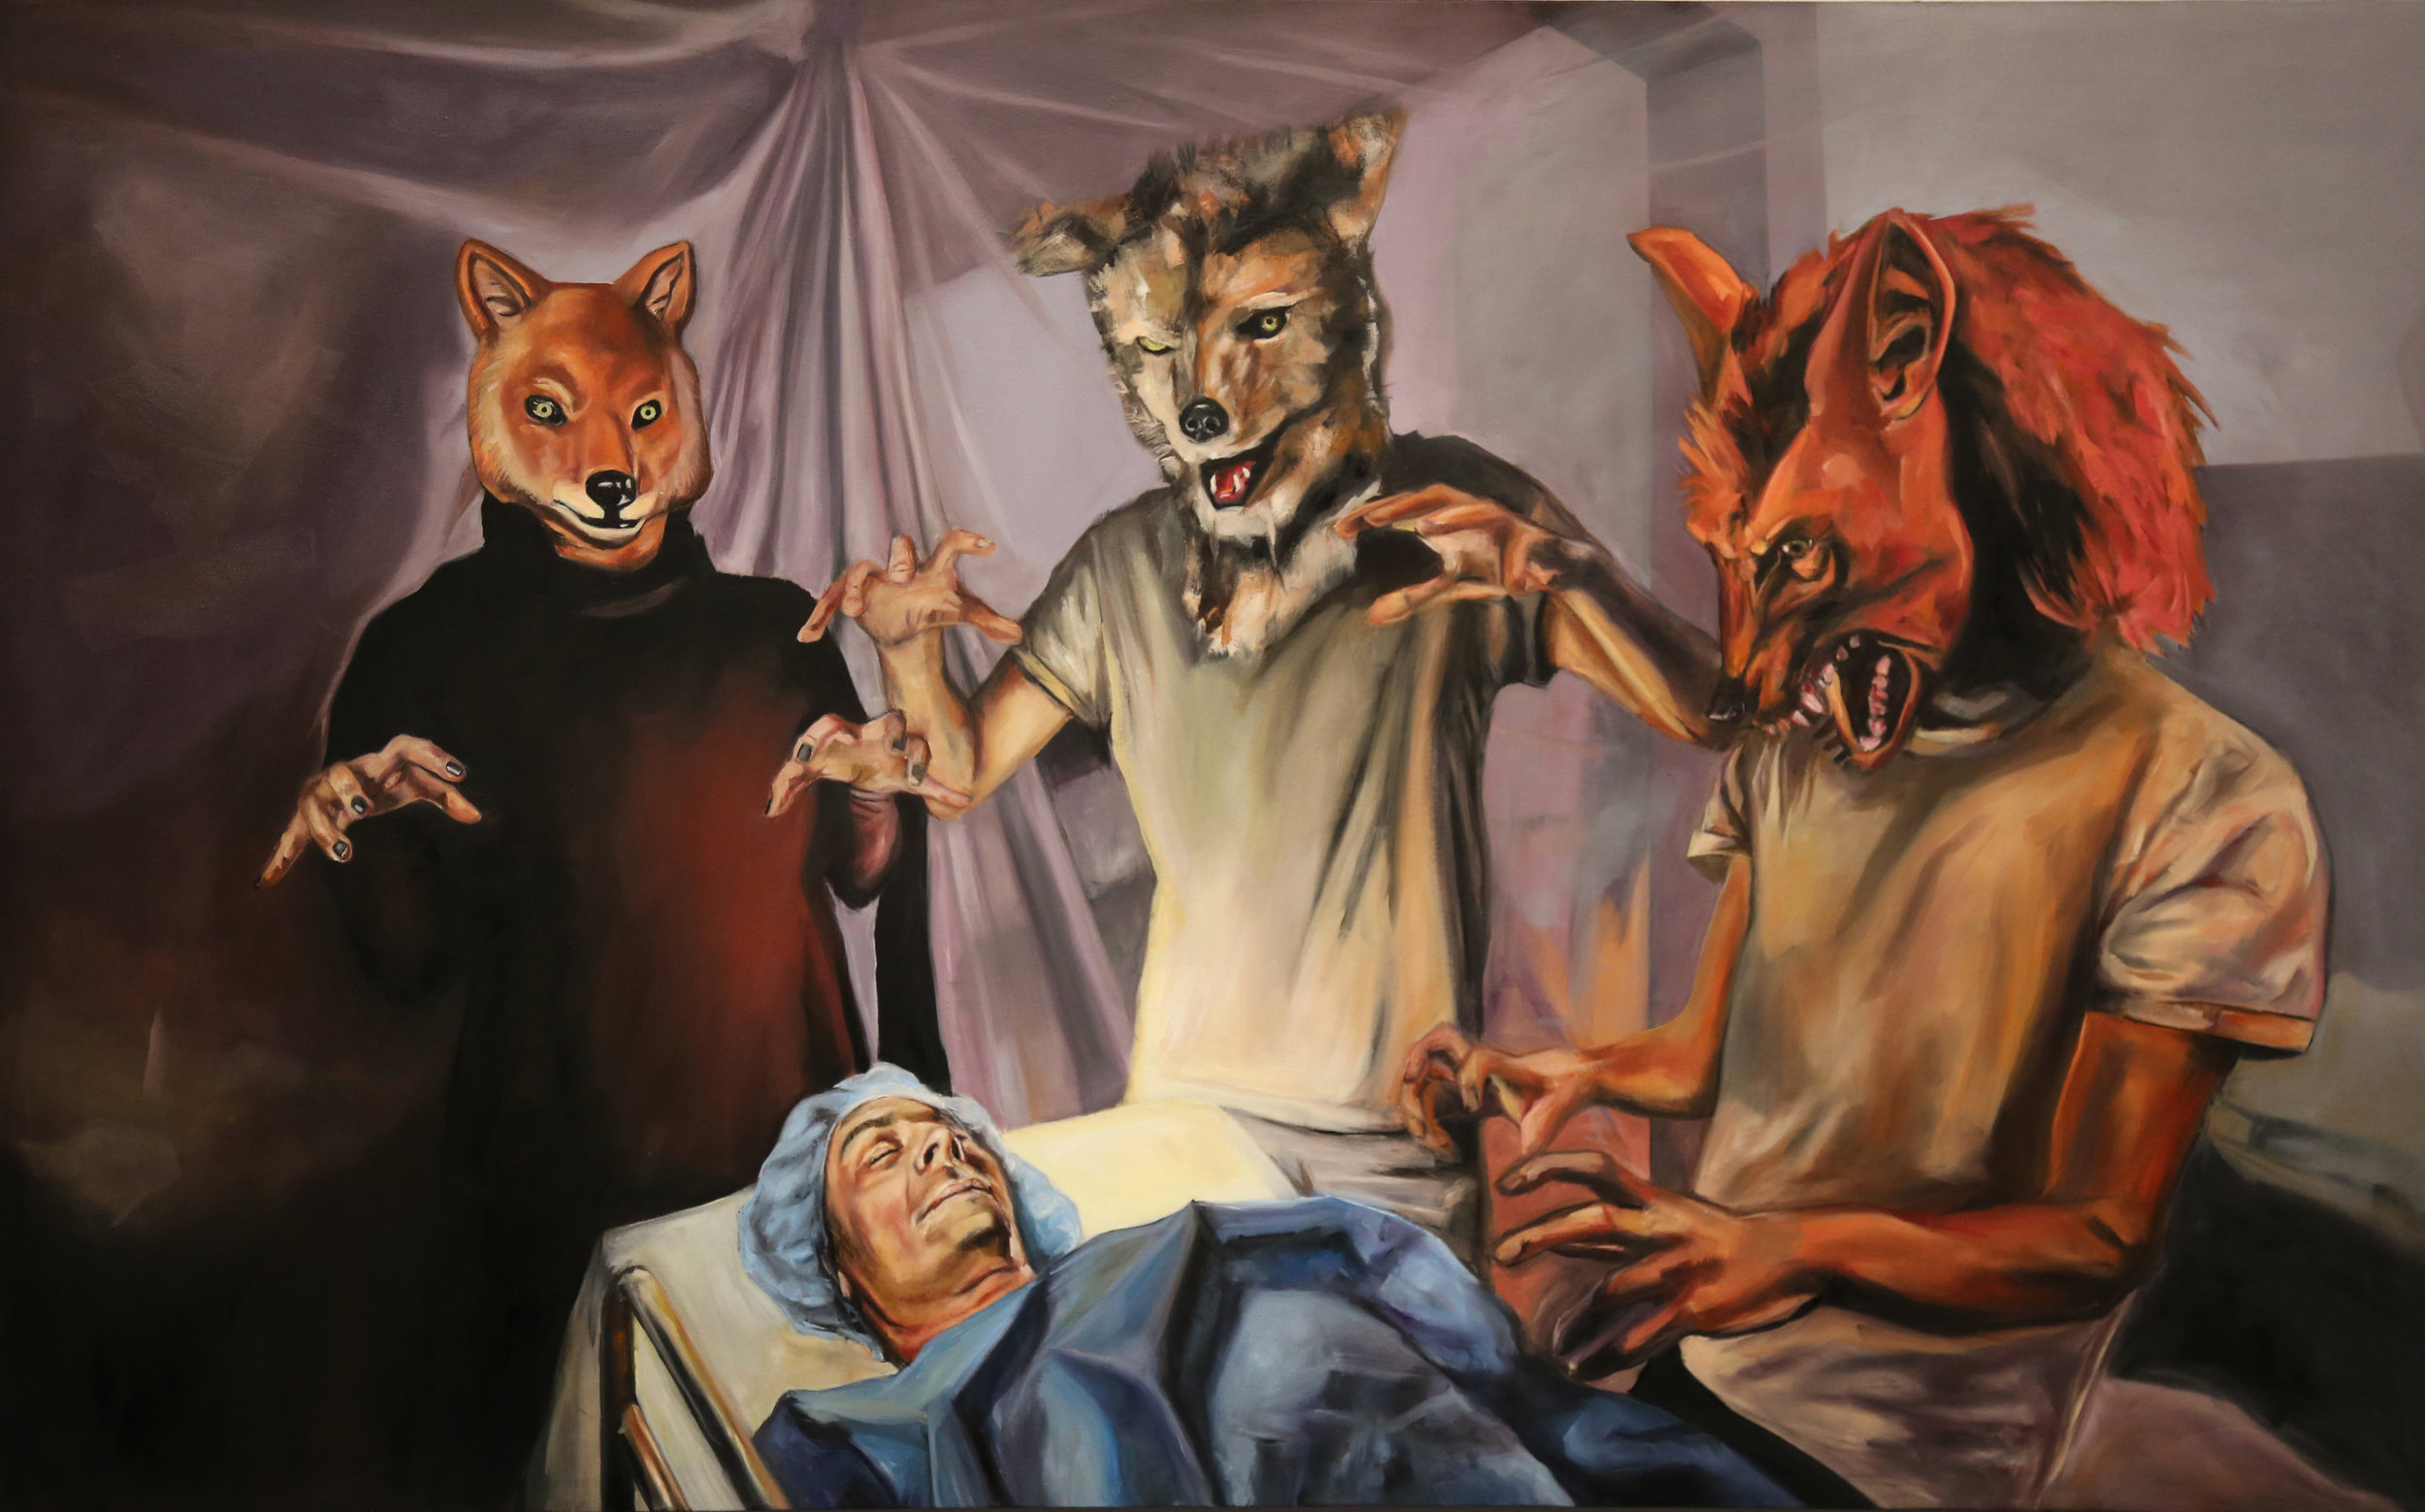  Wolf Party - Oil on canvas - 76" x 47" - 2016  